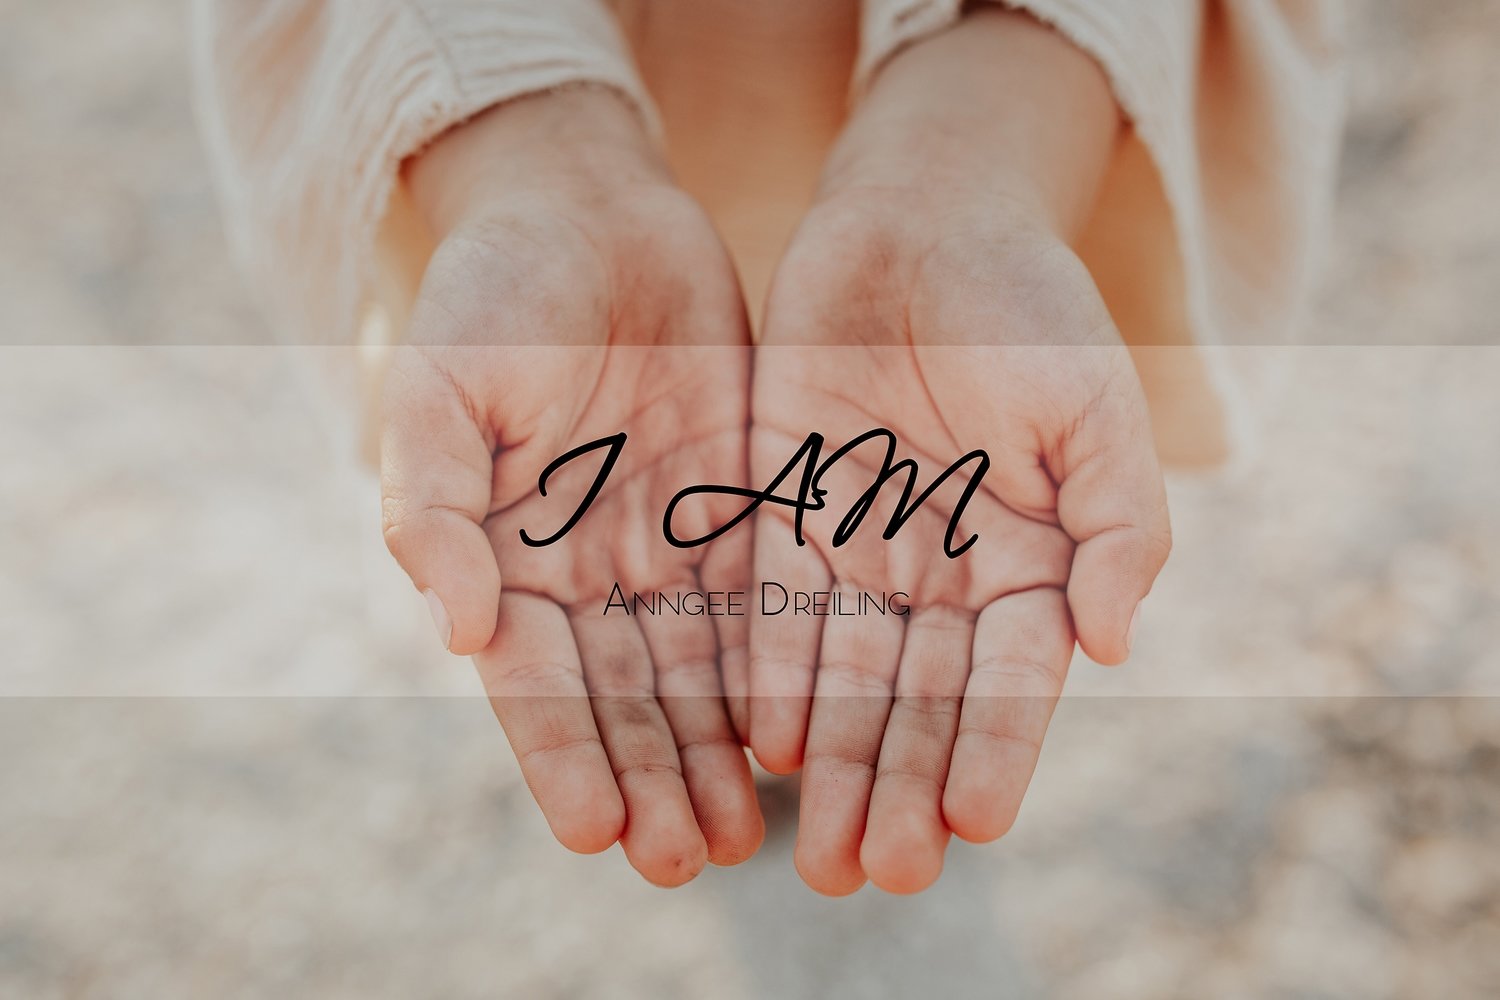 "I AM" Coffee Table Book